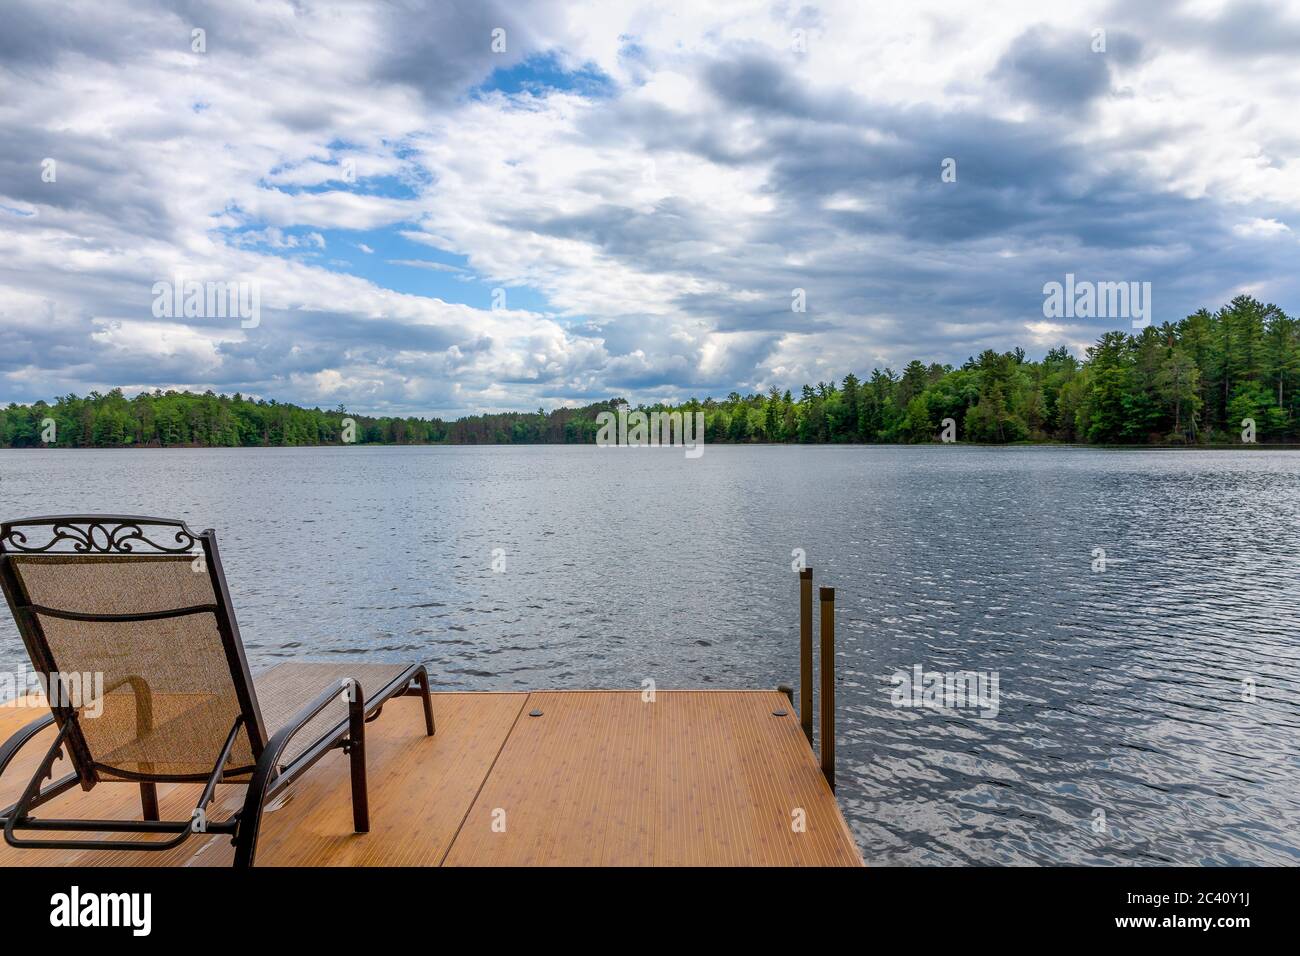 Beach chair on a dock in a Northwoods lake.  Ample copy space in sky if needed. Stock Photo